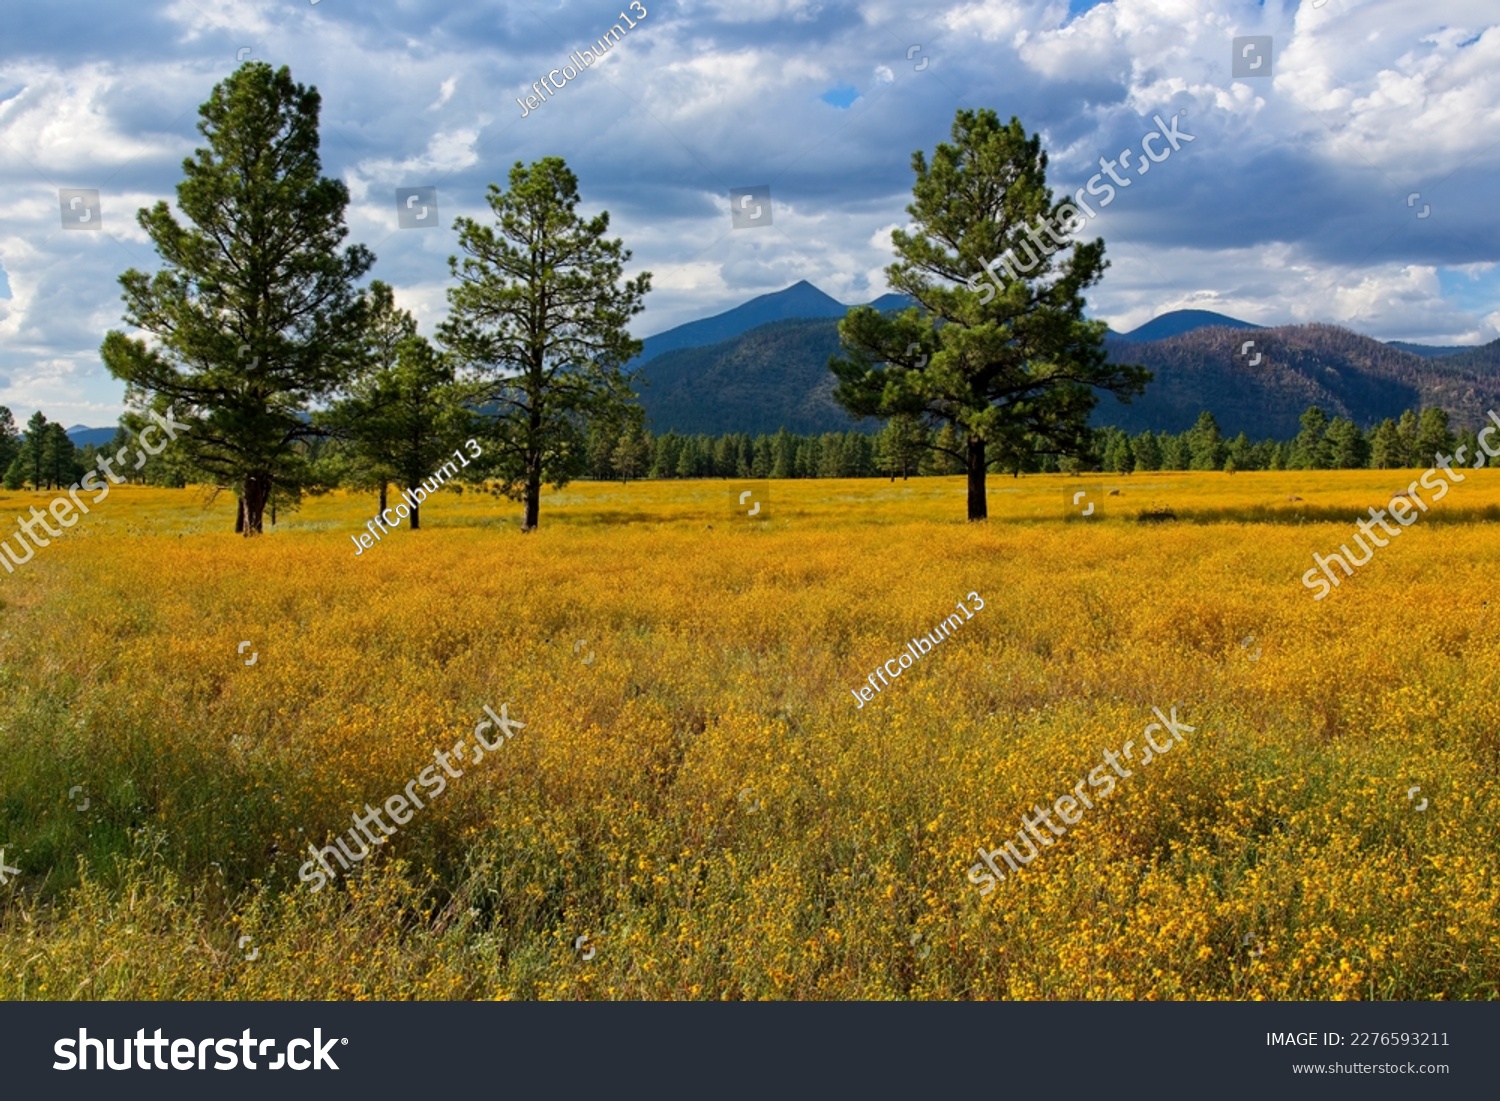 A sea of yellow wildflowers at Buffalo Park, Flagstaff, Arizona. Mountains are in the background, clouds fill the sky and pines are in the scene.  #2276593211